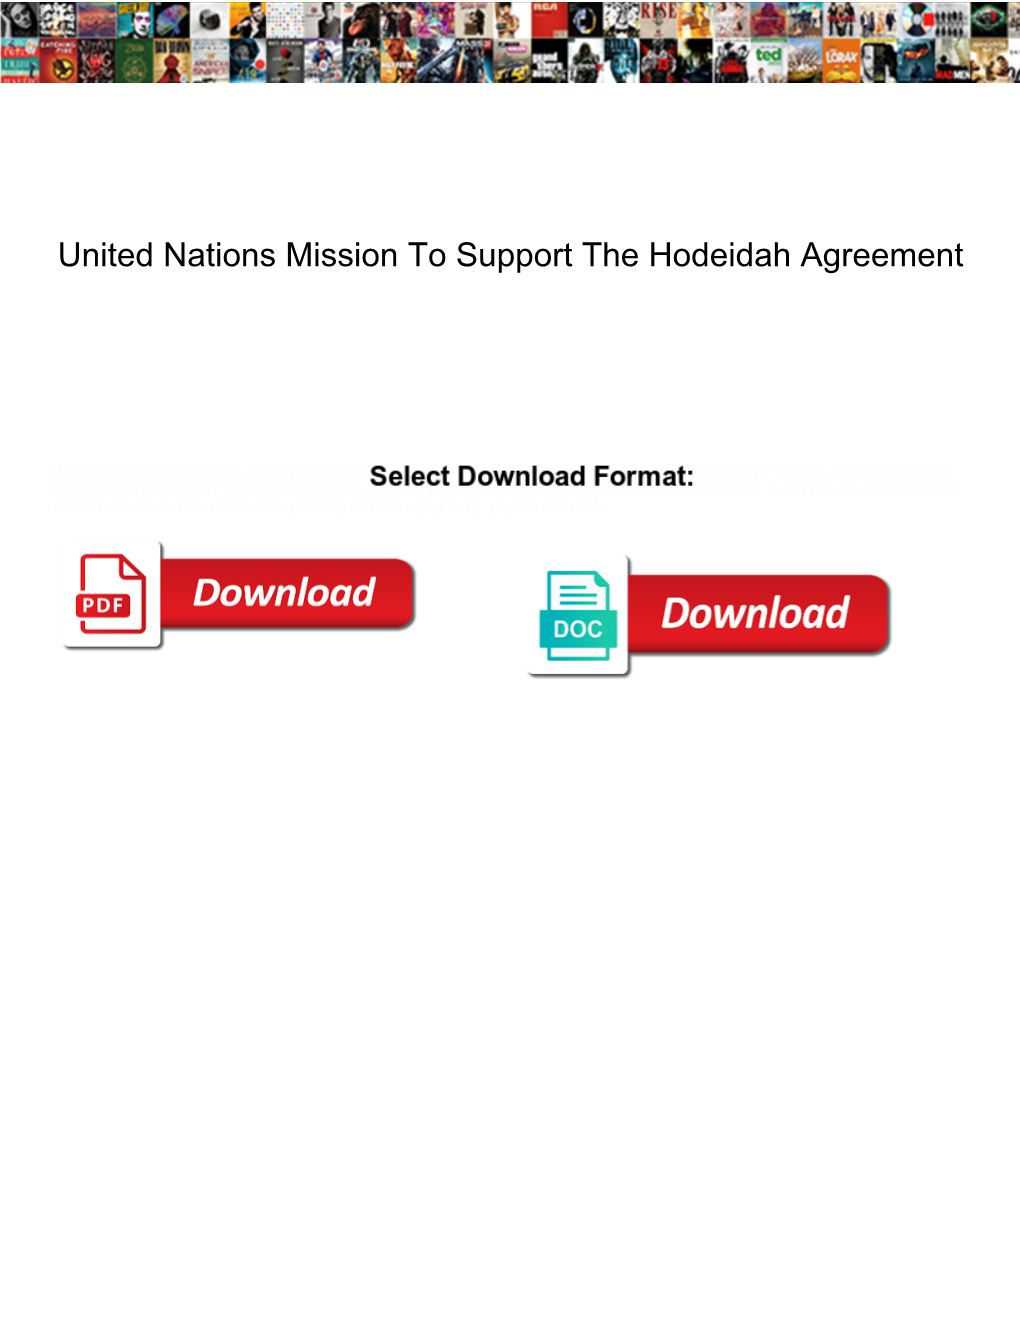 United Nations Mission to Support the Hodeidah Agreement